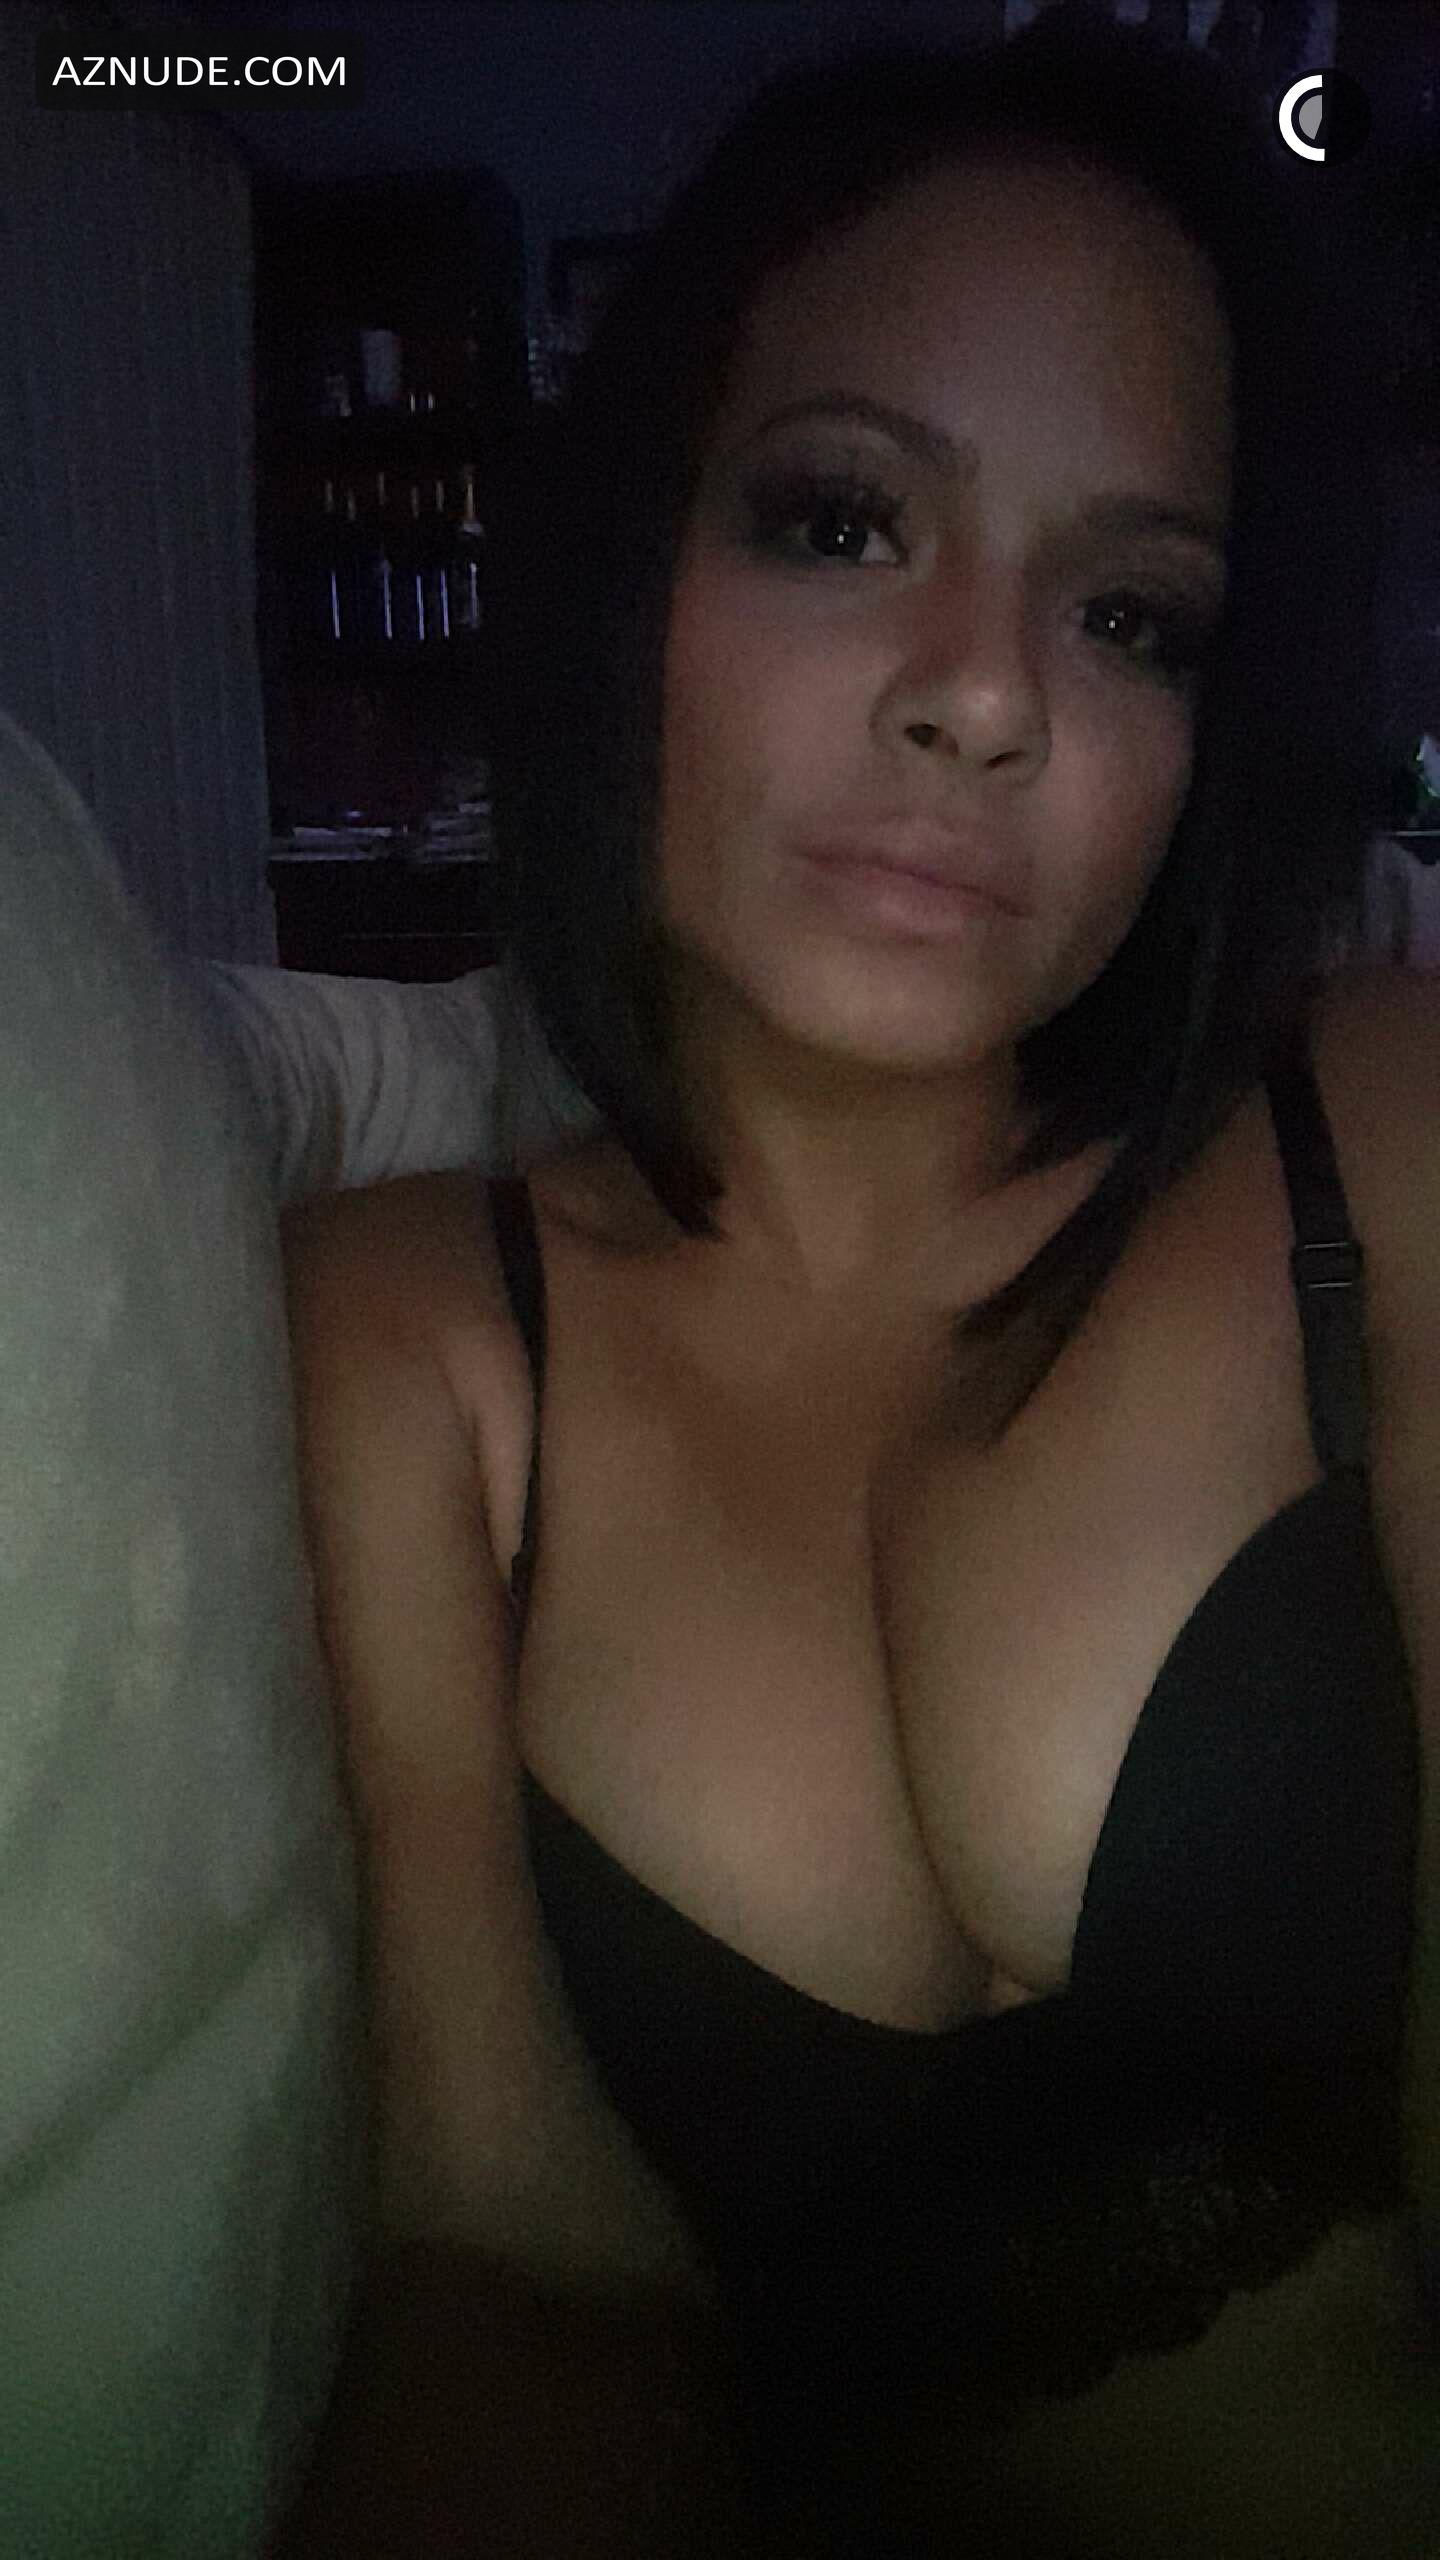 Christina Milian Cleavage From Snapchat 15 11 2015 AZNude